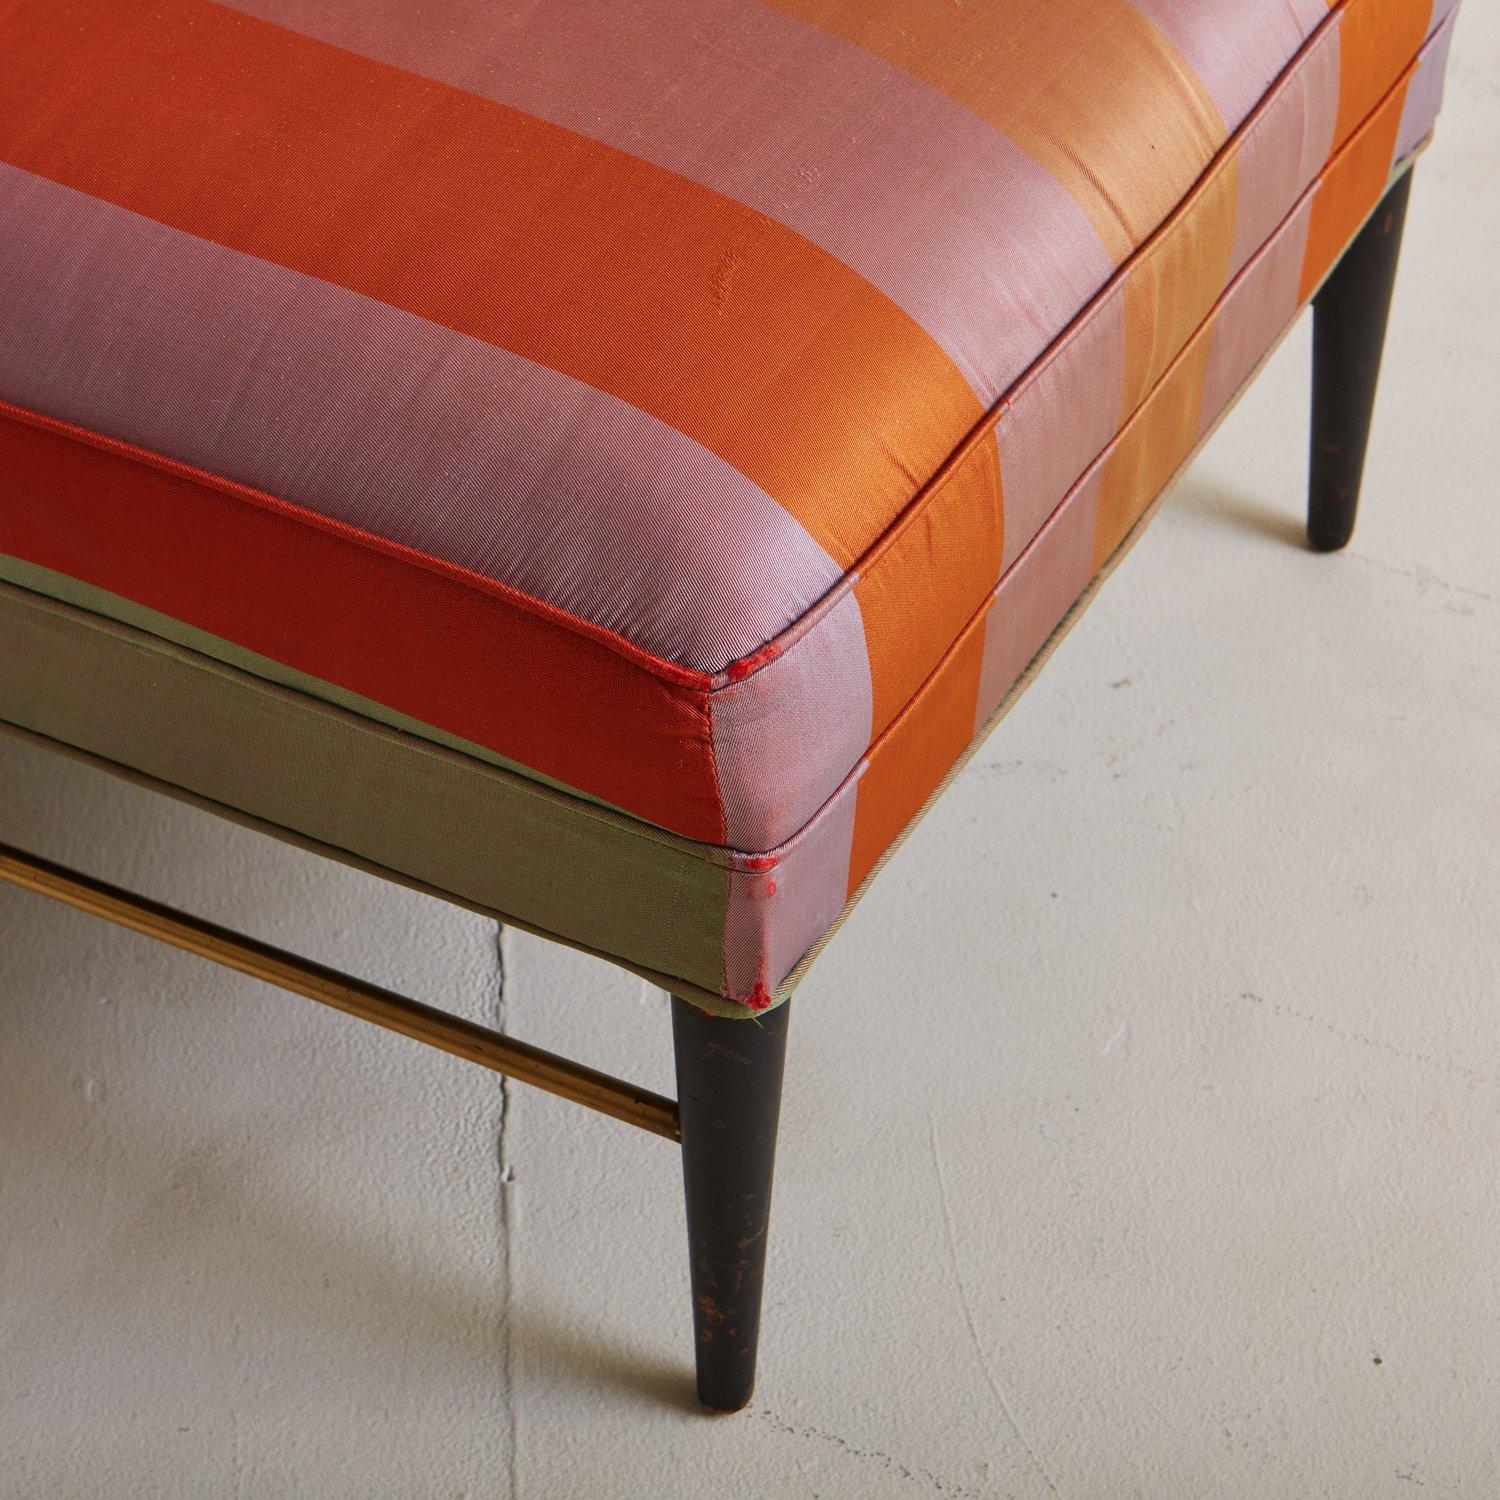 Mid-20th Century Chaise Lounge in Striped Silk by Paul McCobb for Directional, USA 1950s For Sale